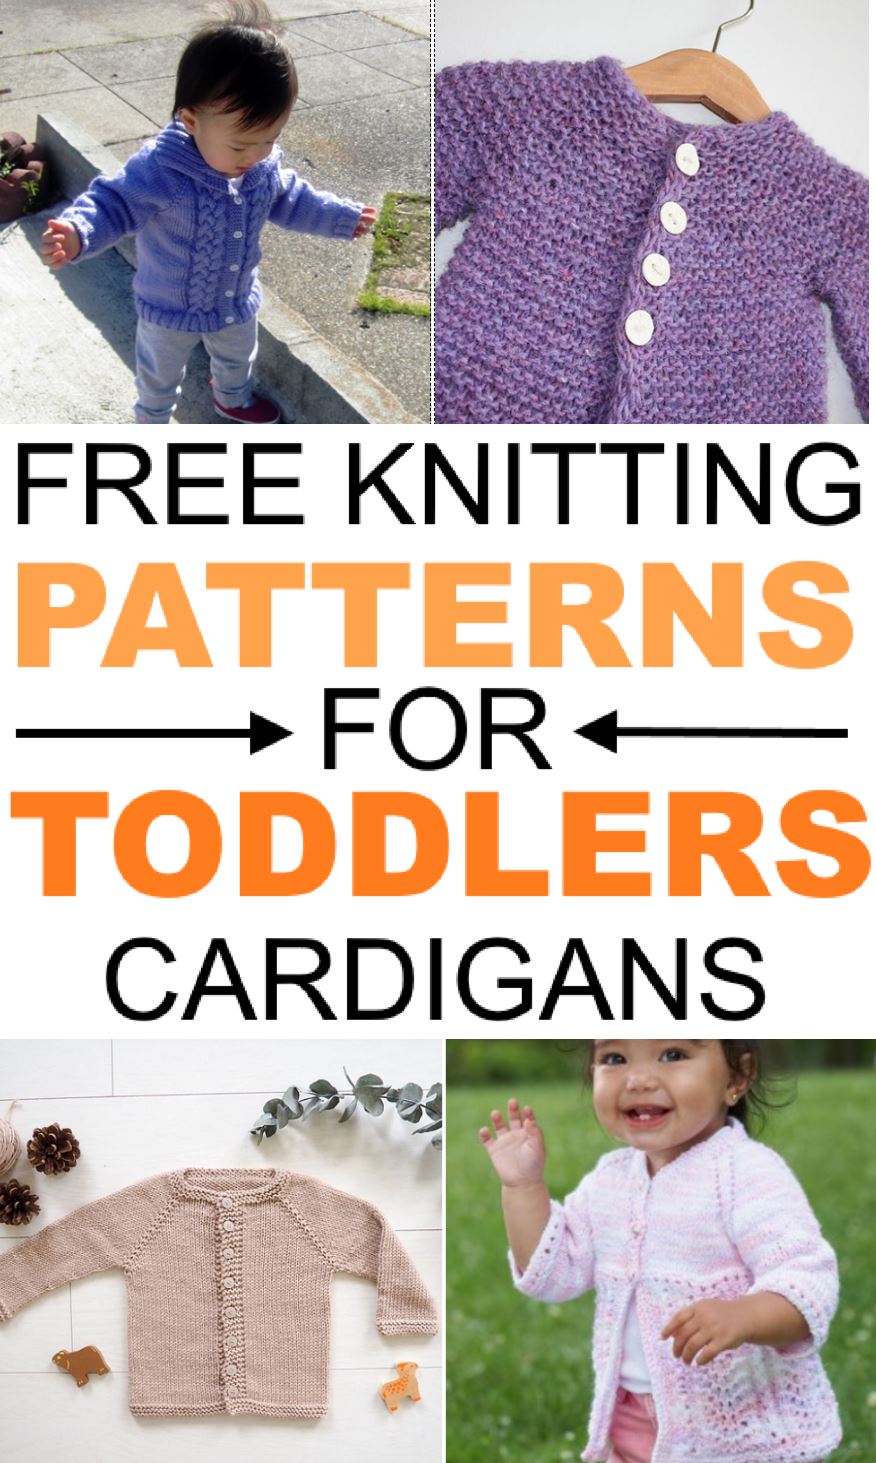 Free Knitting Patterns for Toddlers Cardigans - Knitting Bee